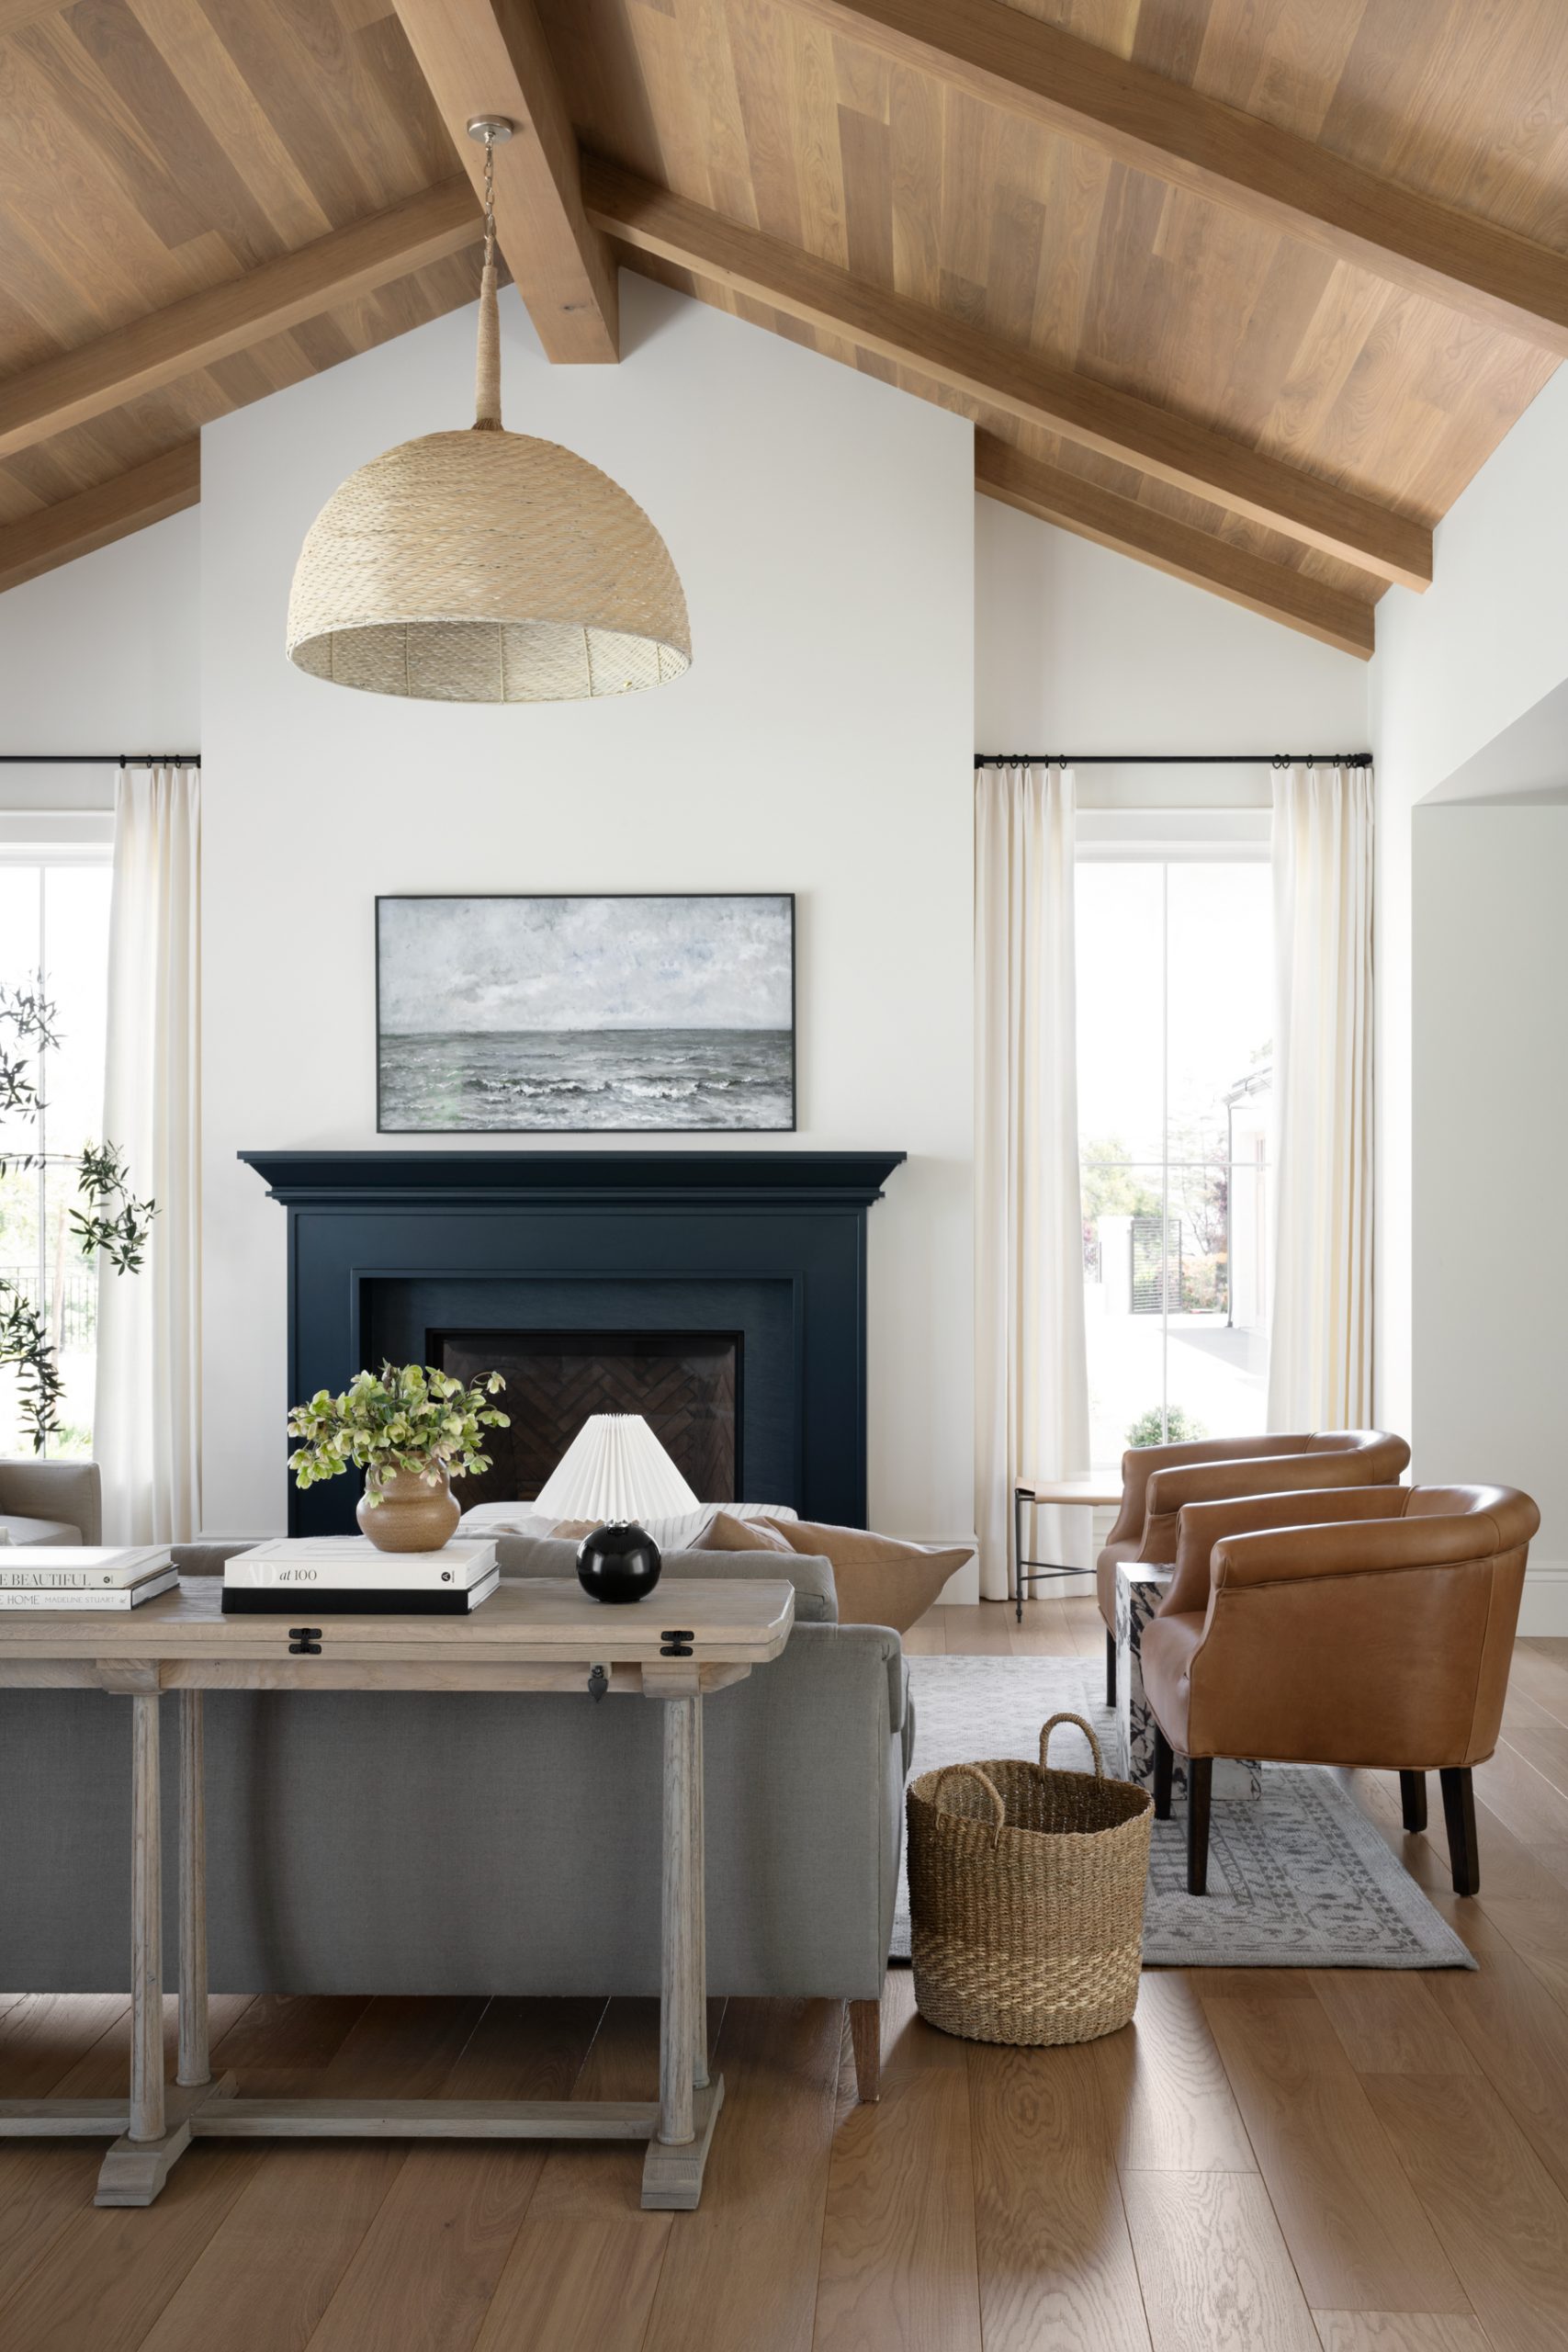 Coastal living room with gray sofas and leather chairs with pendant